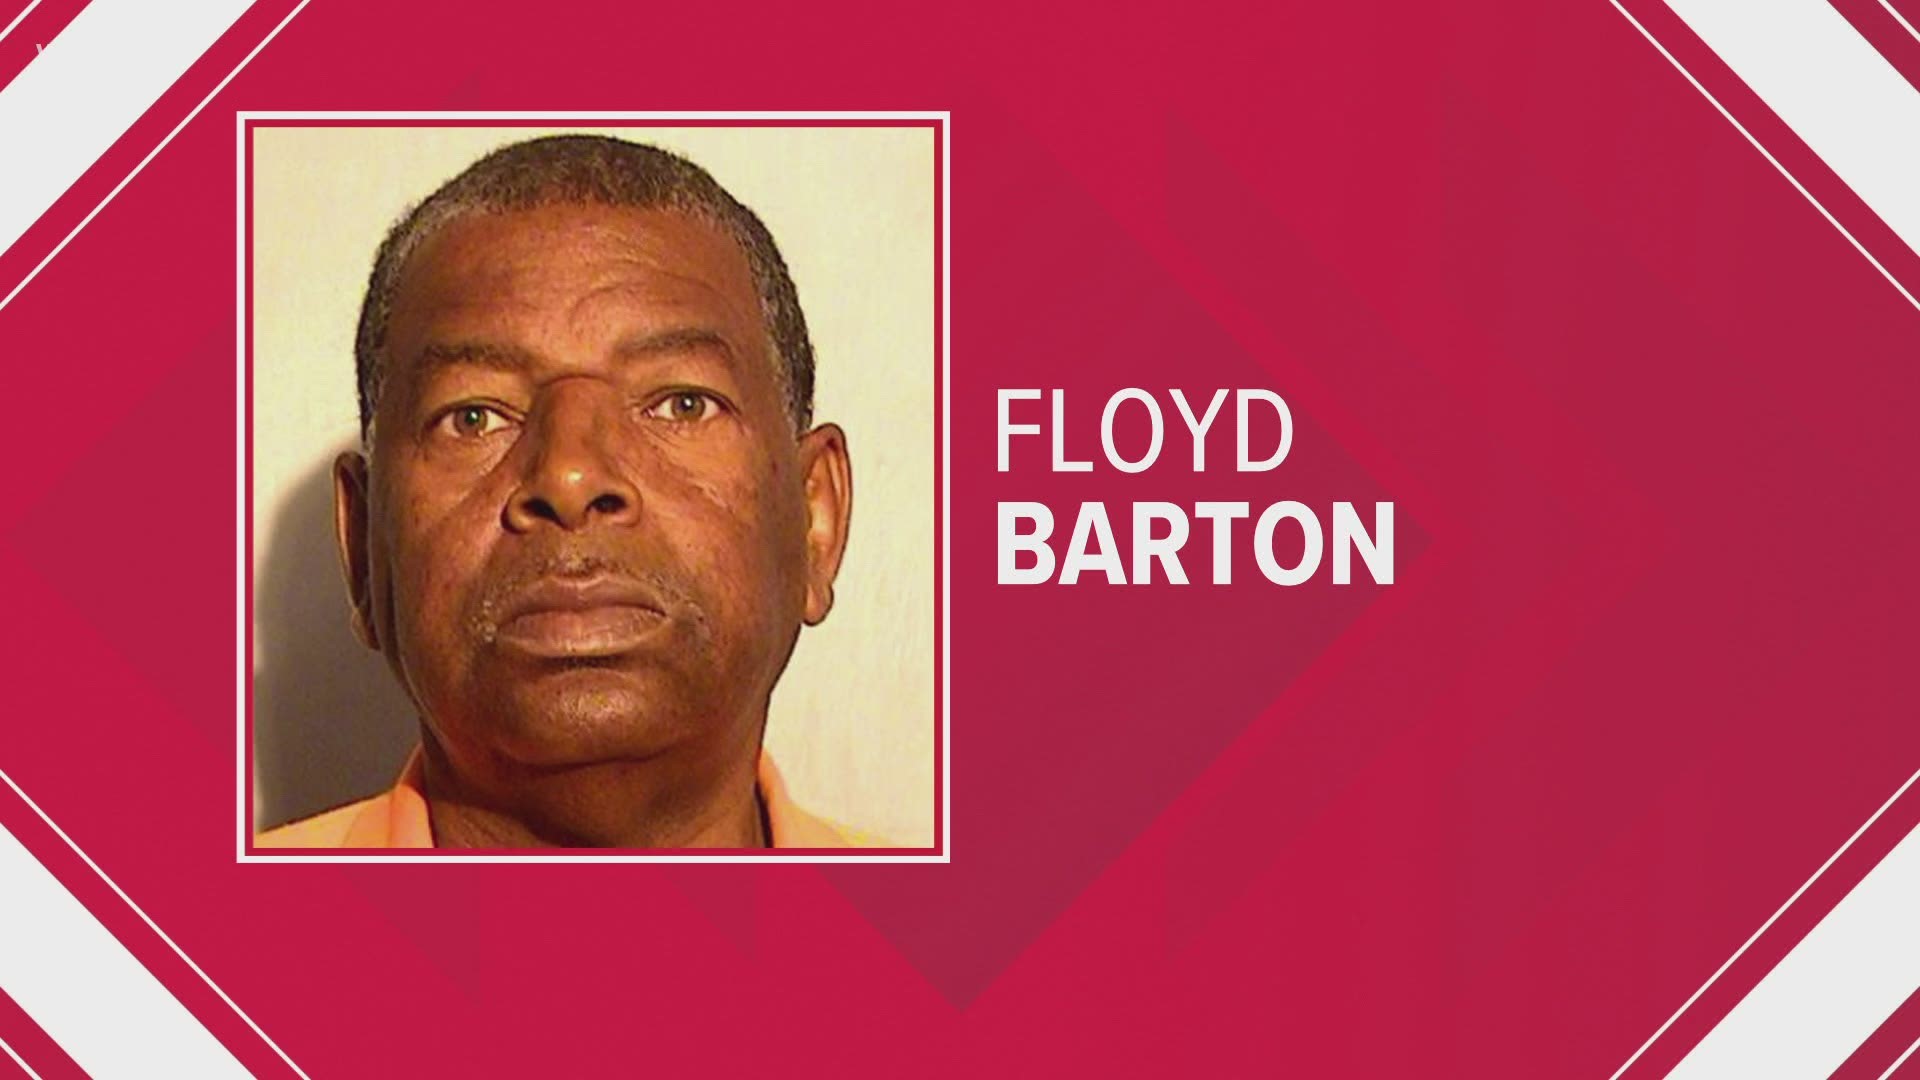 Floyd Barton was charged with the murder of Dennison Bowen. James Smith and Bowen were shot and killed back in June, according to police.